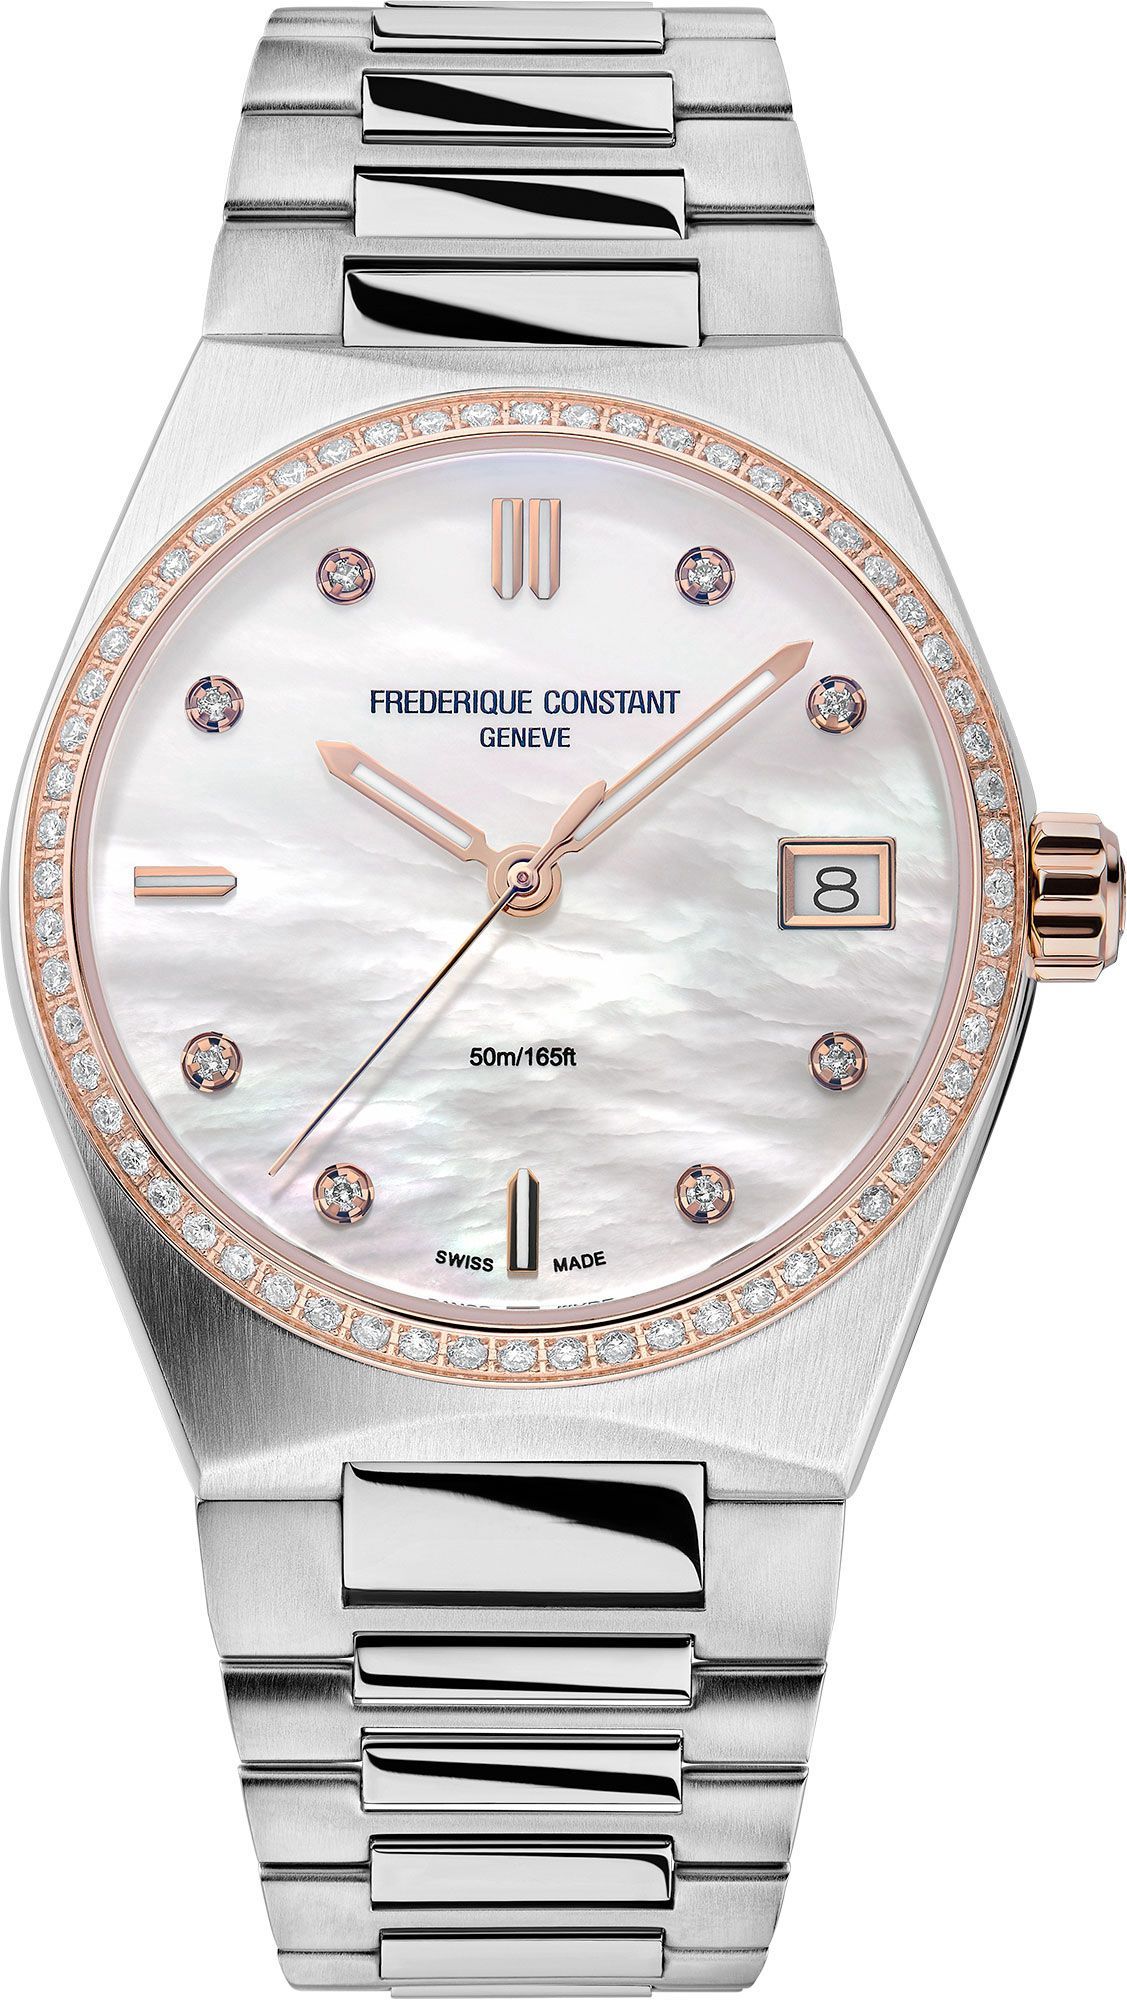 Frederique Constant Highlife Highlife Ladies Automatic MOP Dial 34 mm Automatic Watch For Women - 1